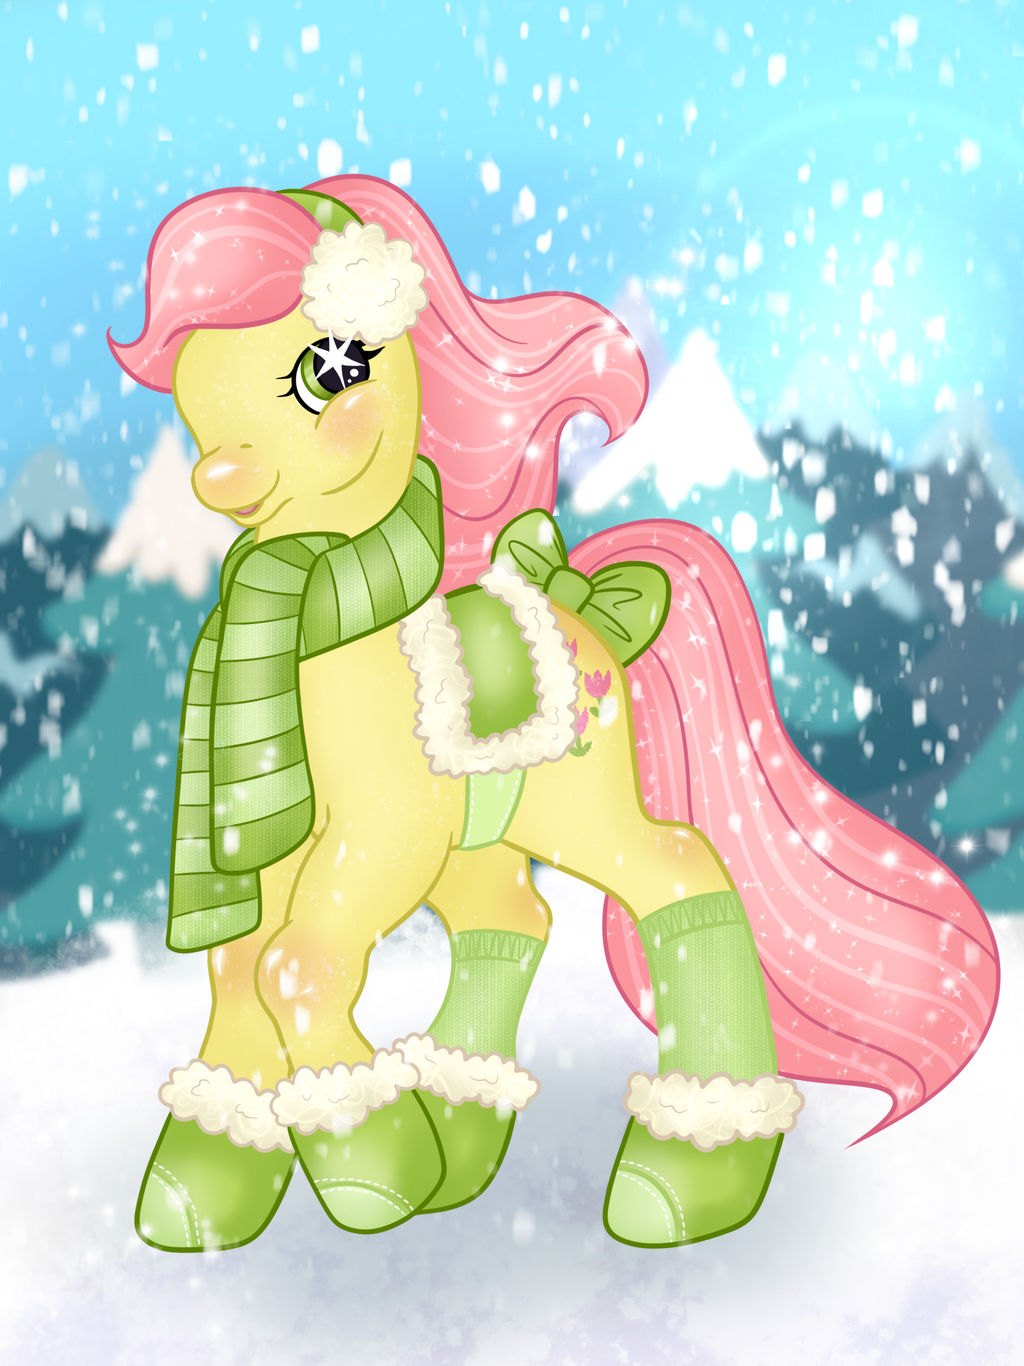 christmas_posey_commission_for_dannahbanana_by_graceruby_dfjvcp3-fullview.jpg